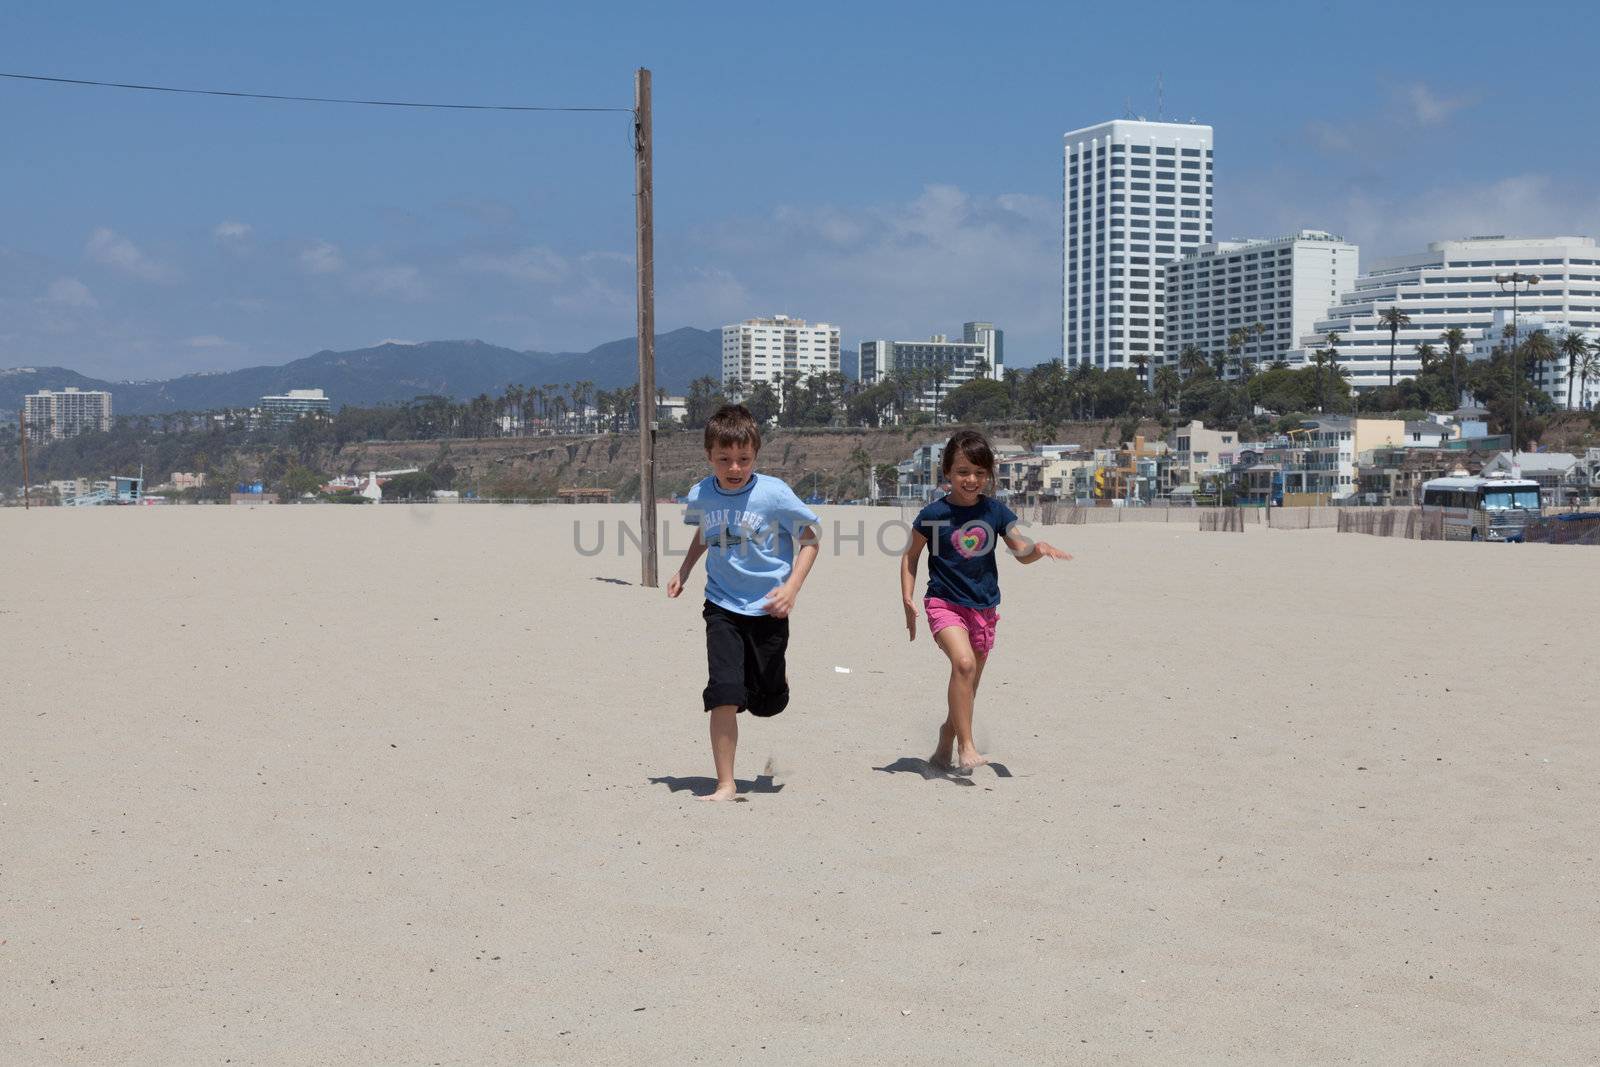 Little girl and boy running and racing in the sand on the beach.